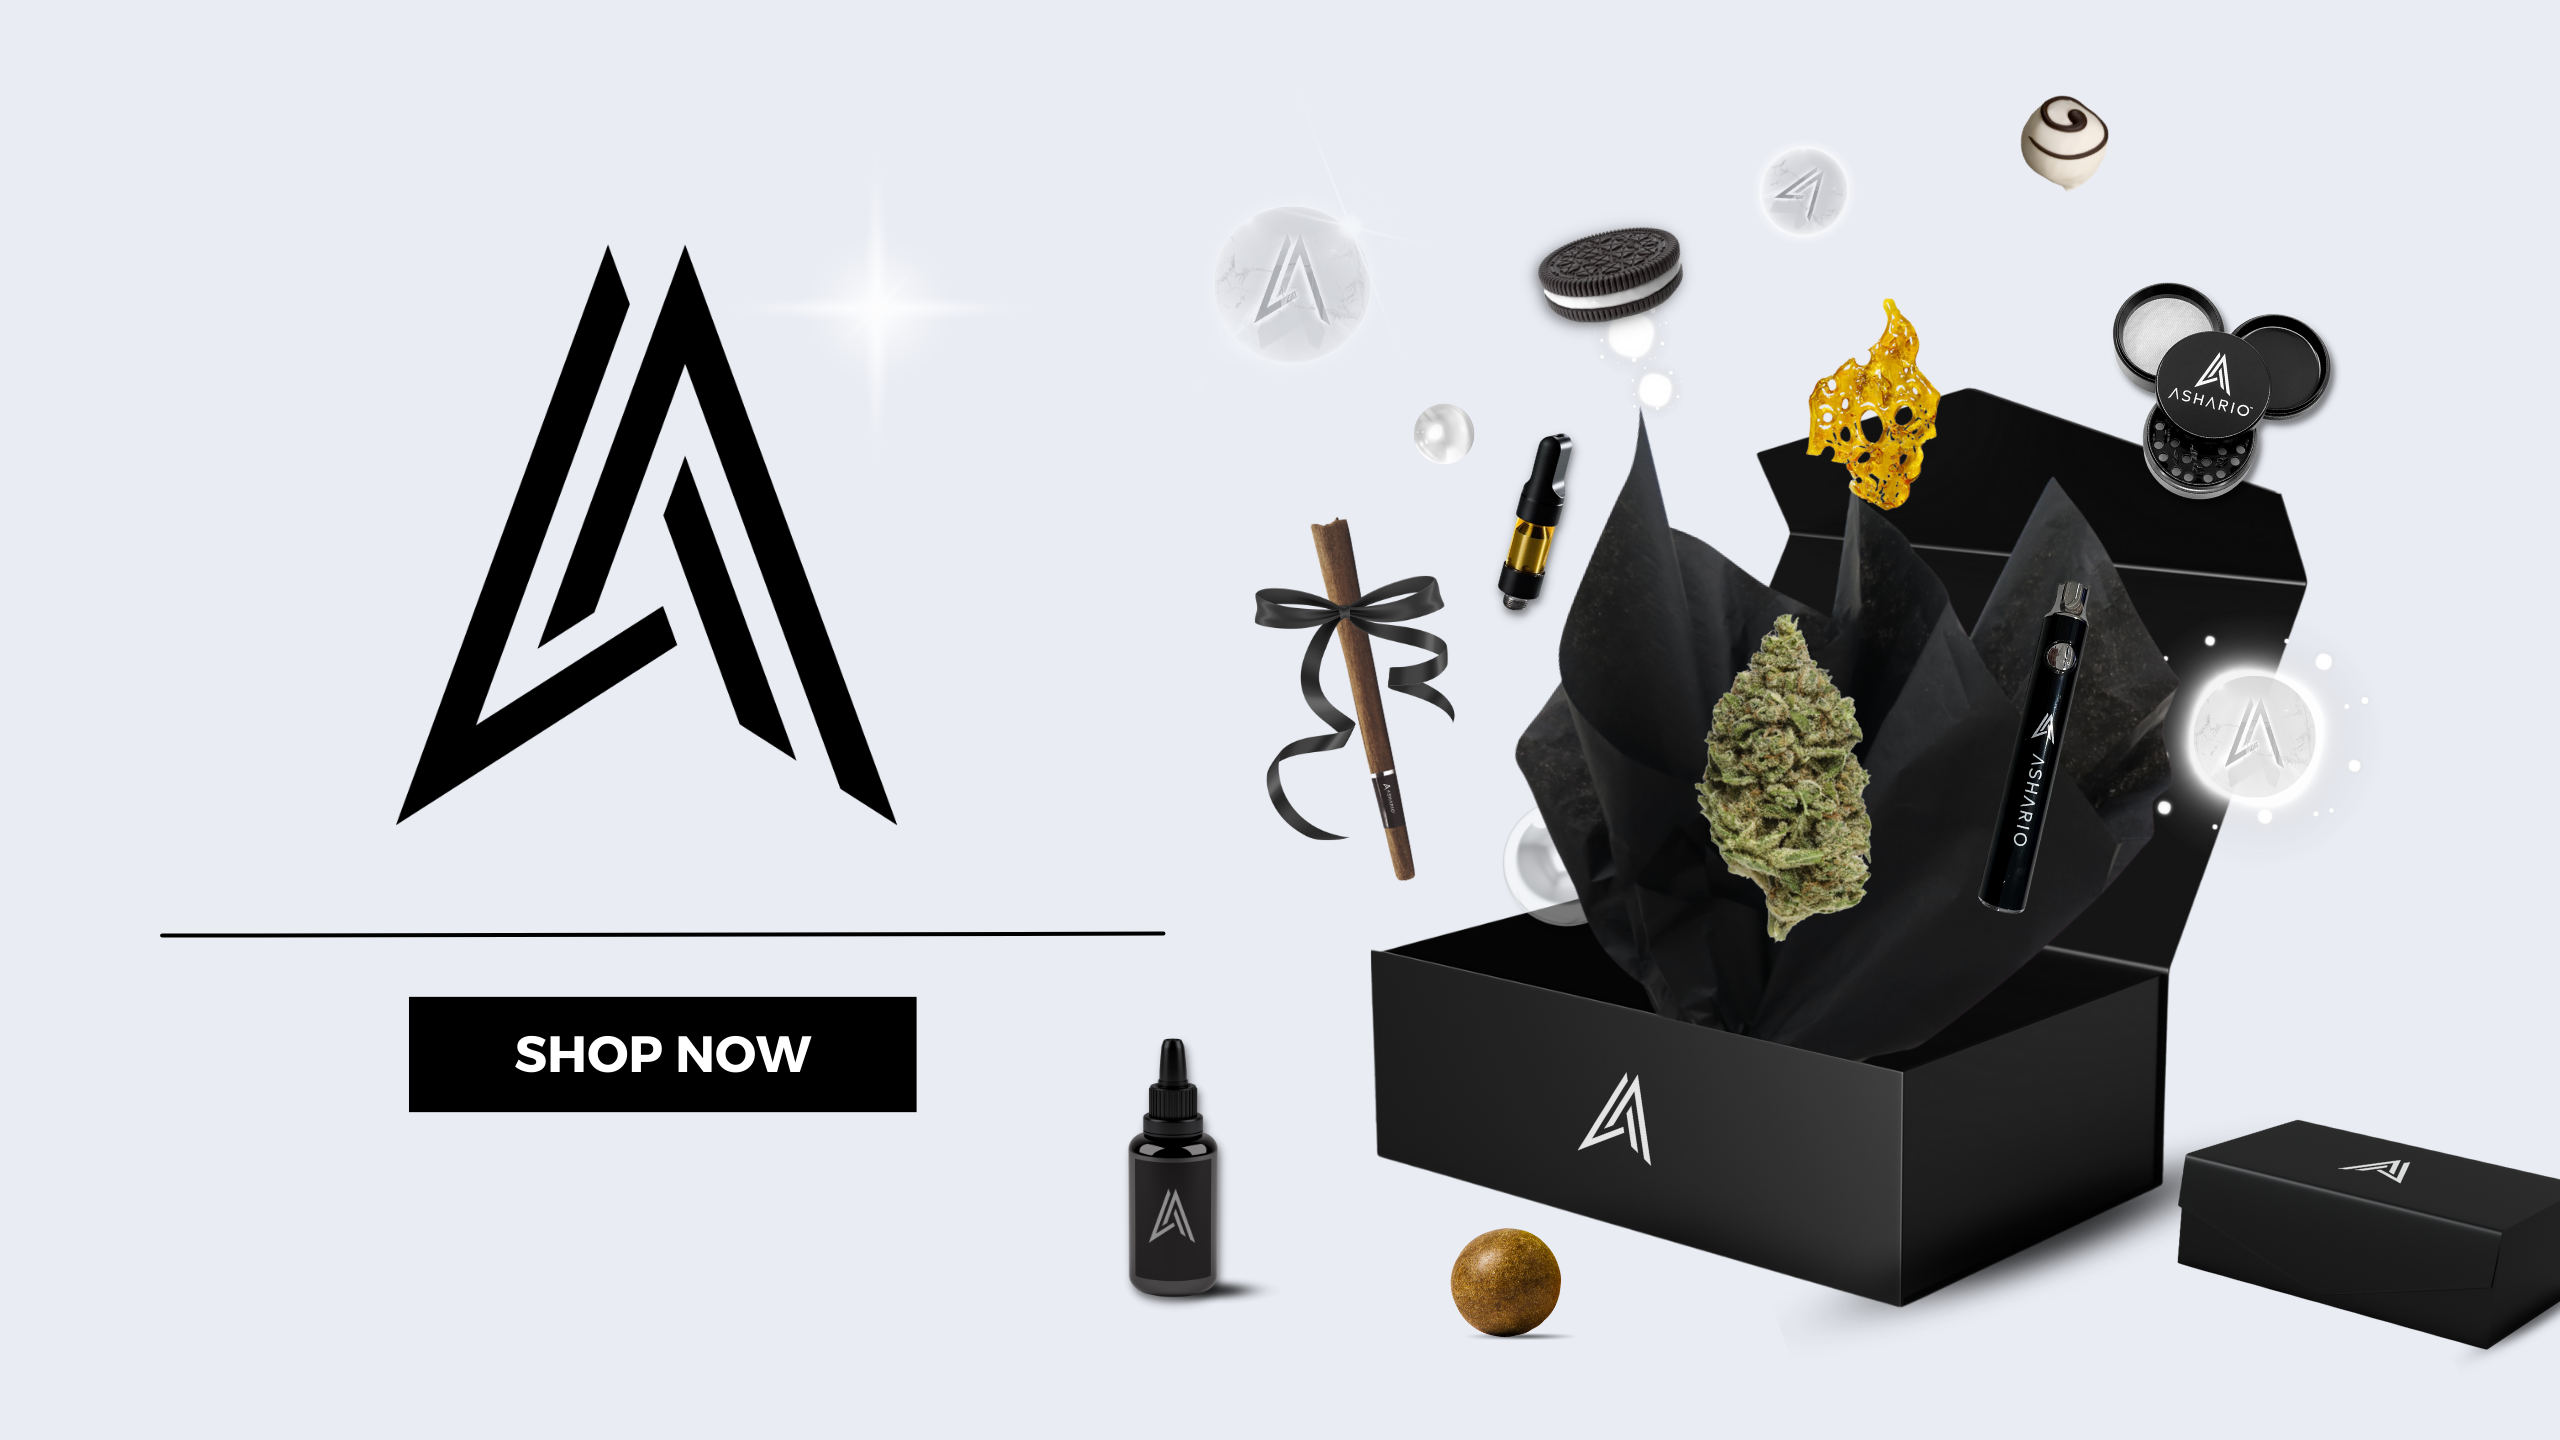 Uncover the pinnacle of potency with Ashario Cannabis' selection of the best THC strains. Crafted for the discerning connoisseur seeking intense effects, our lineup features a variety of strains renowned for their high THC content.